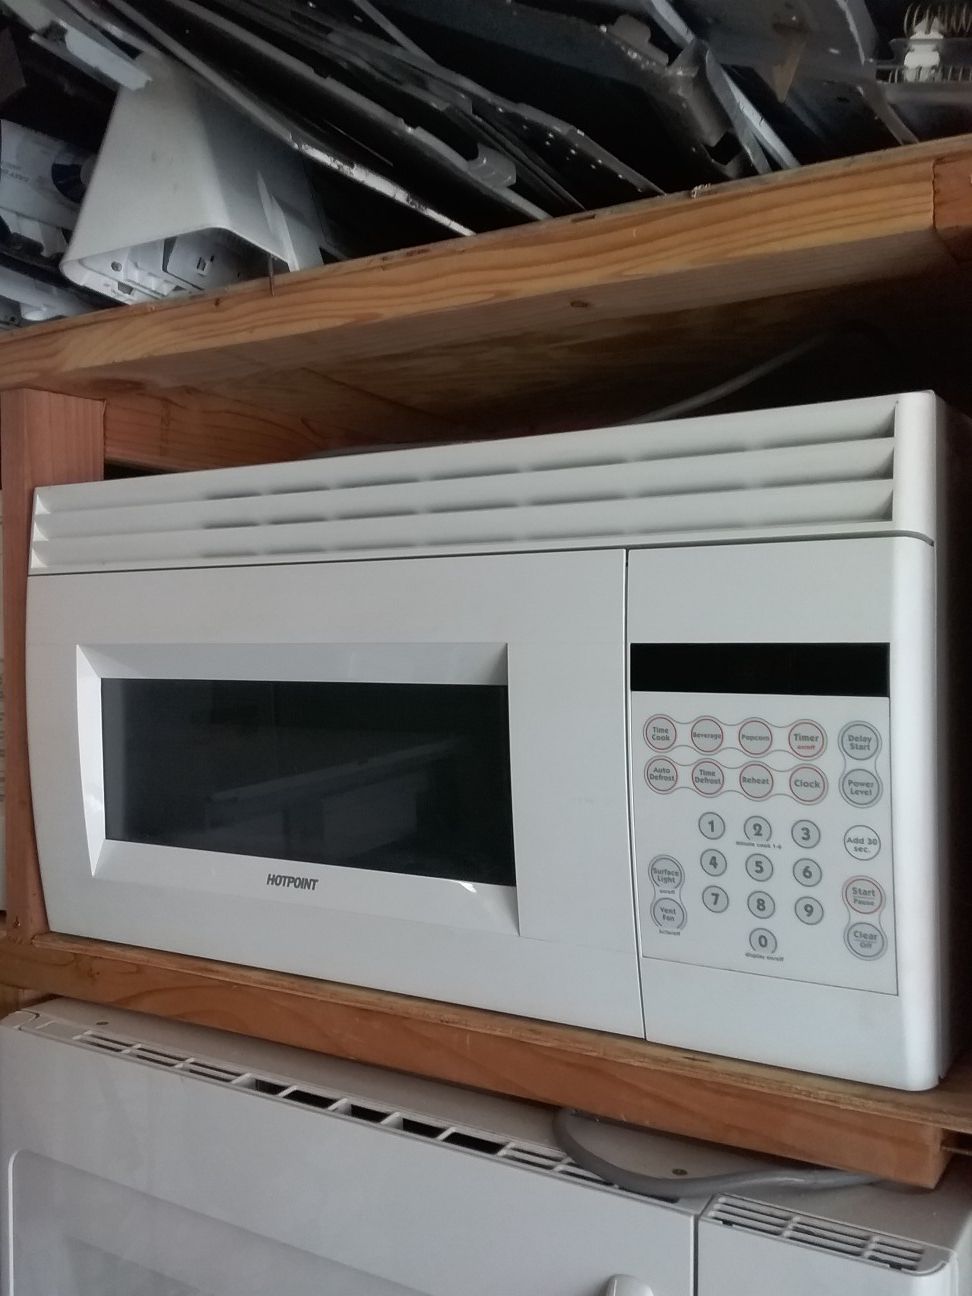 Off white ge over the range microwave bracket and screws included in good working condition